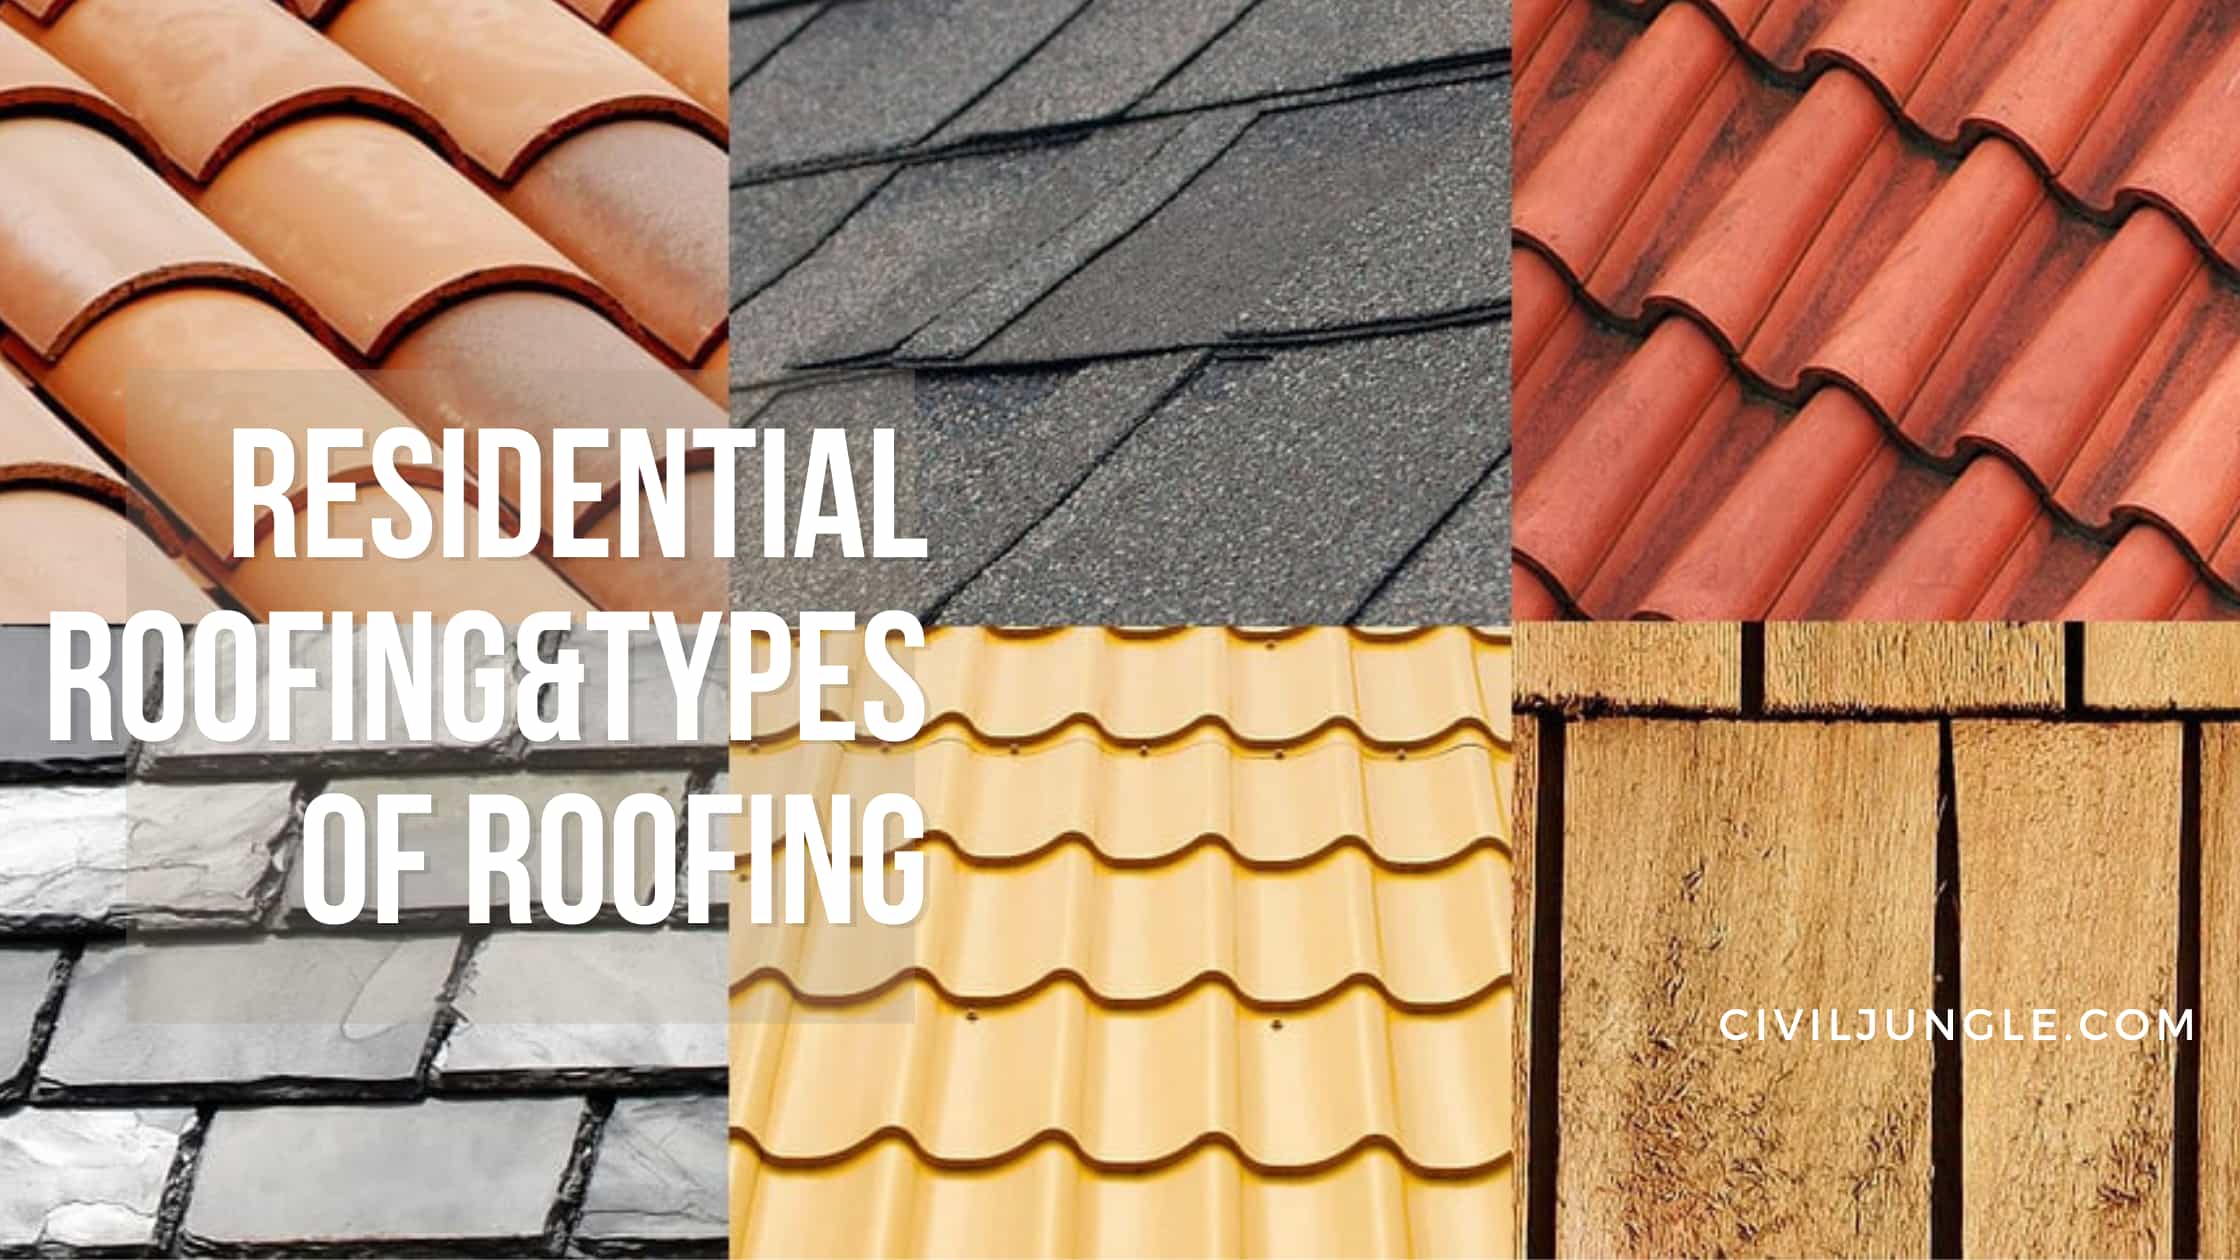 Residential Roofing&Types of Roofing